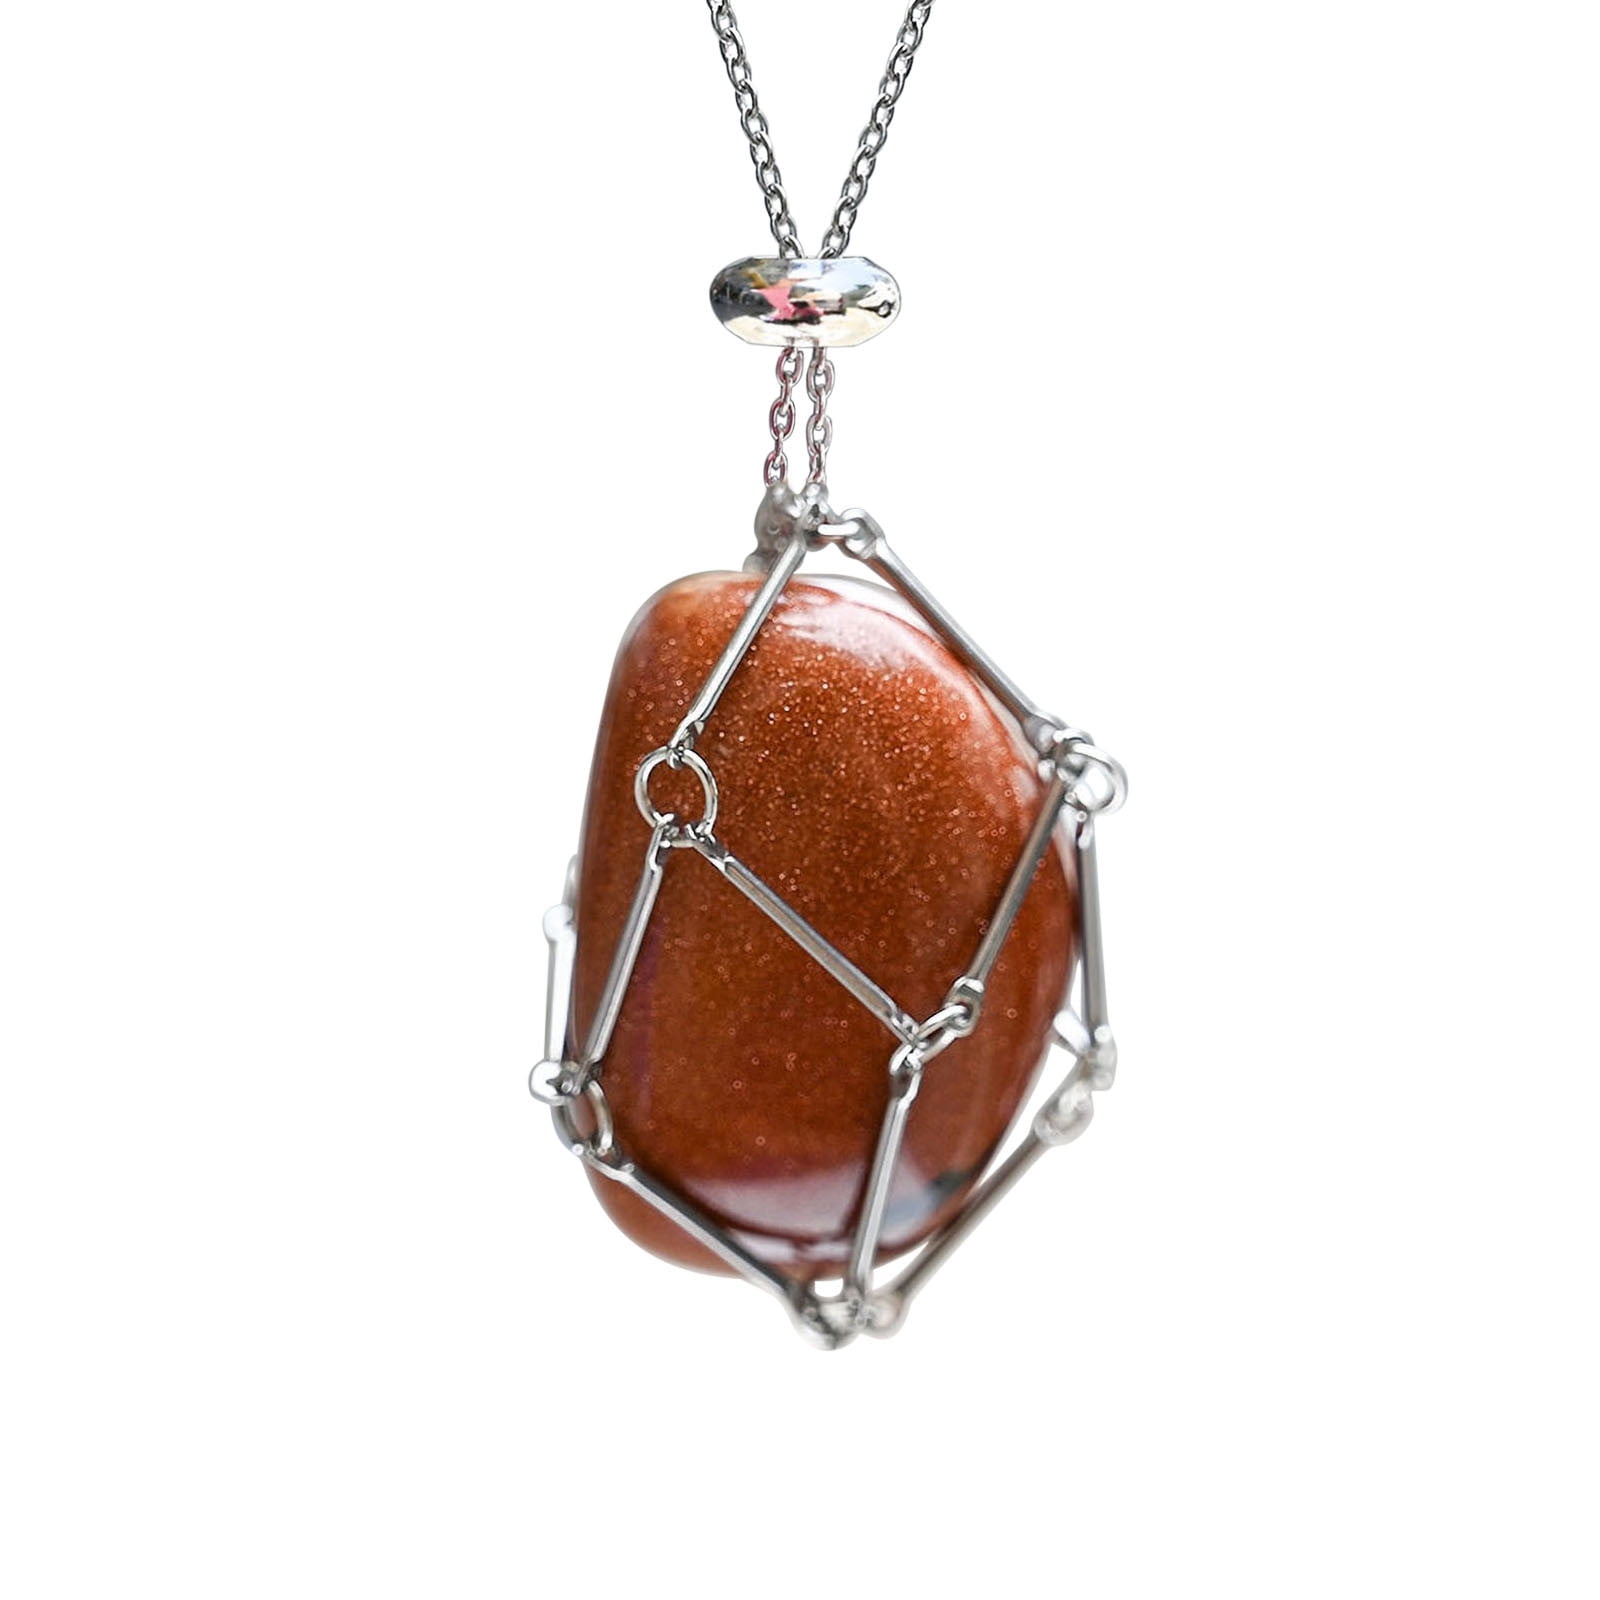 Necklace Cord Stone Holder with Natural Crystal Stone – energized4wellness